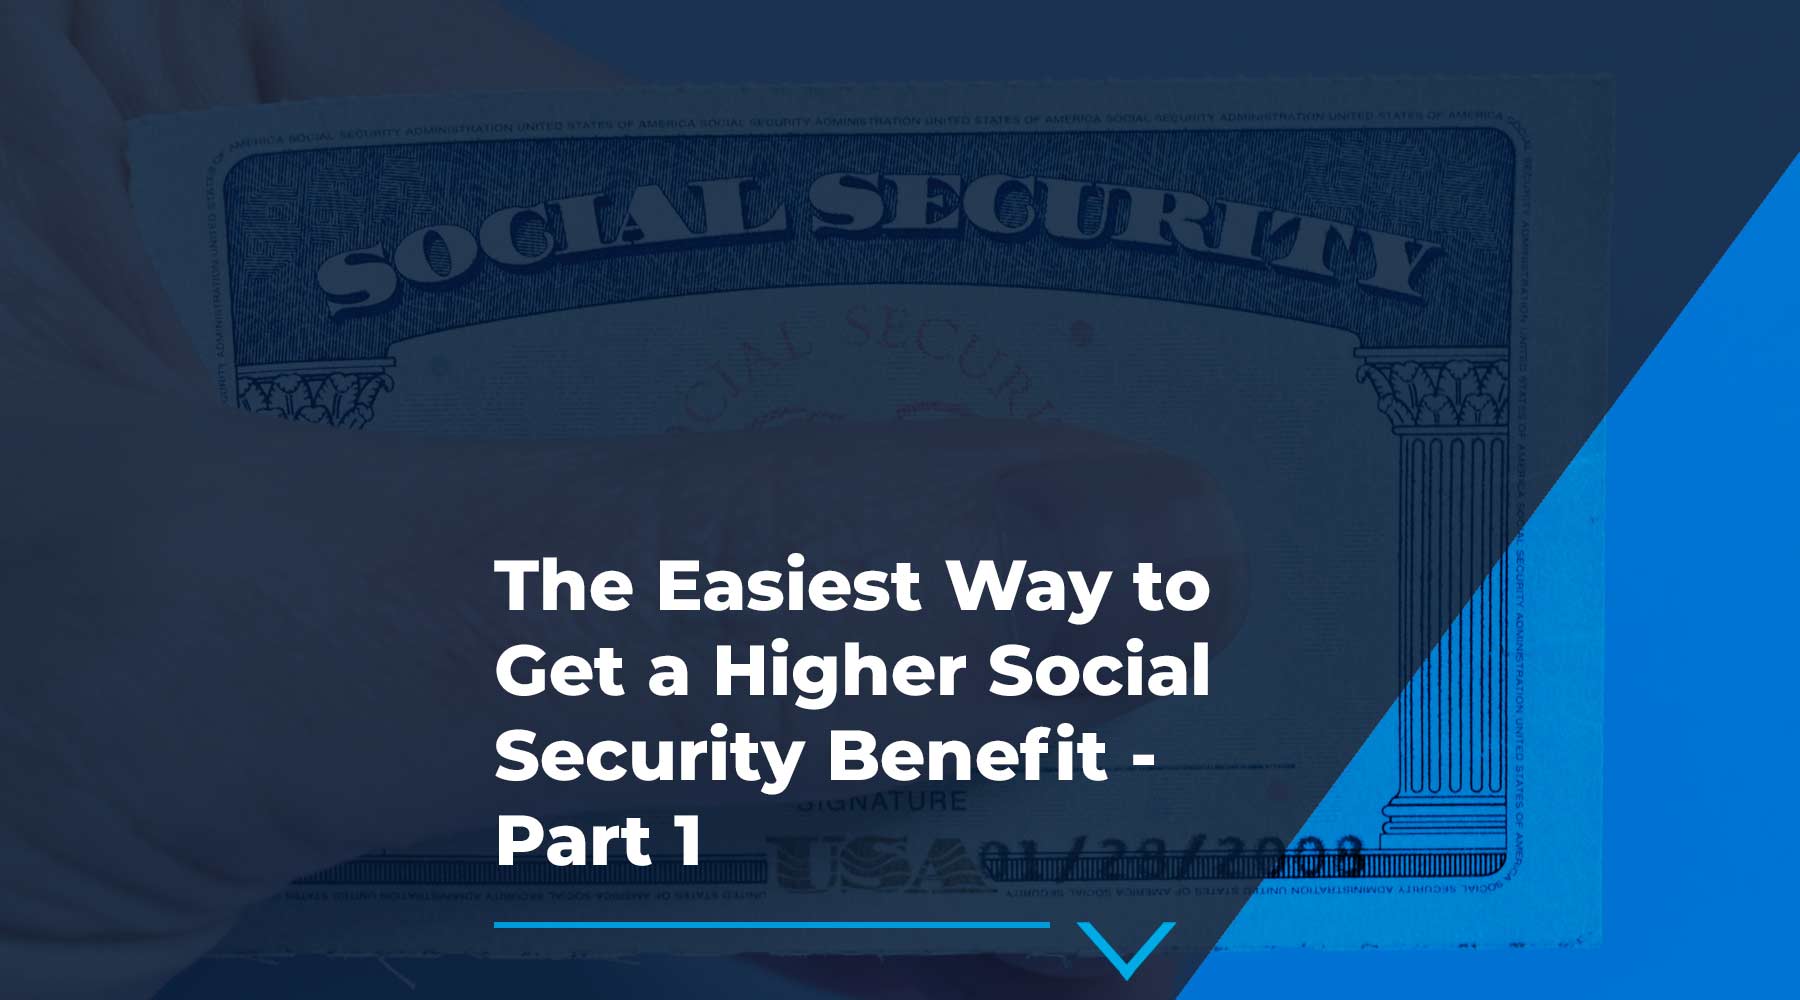 The Easiest Way to Get a Higher Social Security Benefit - Part 1